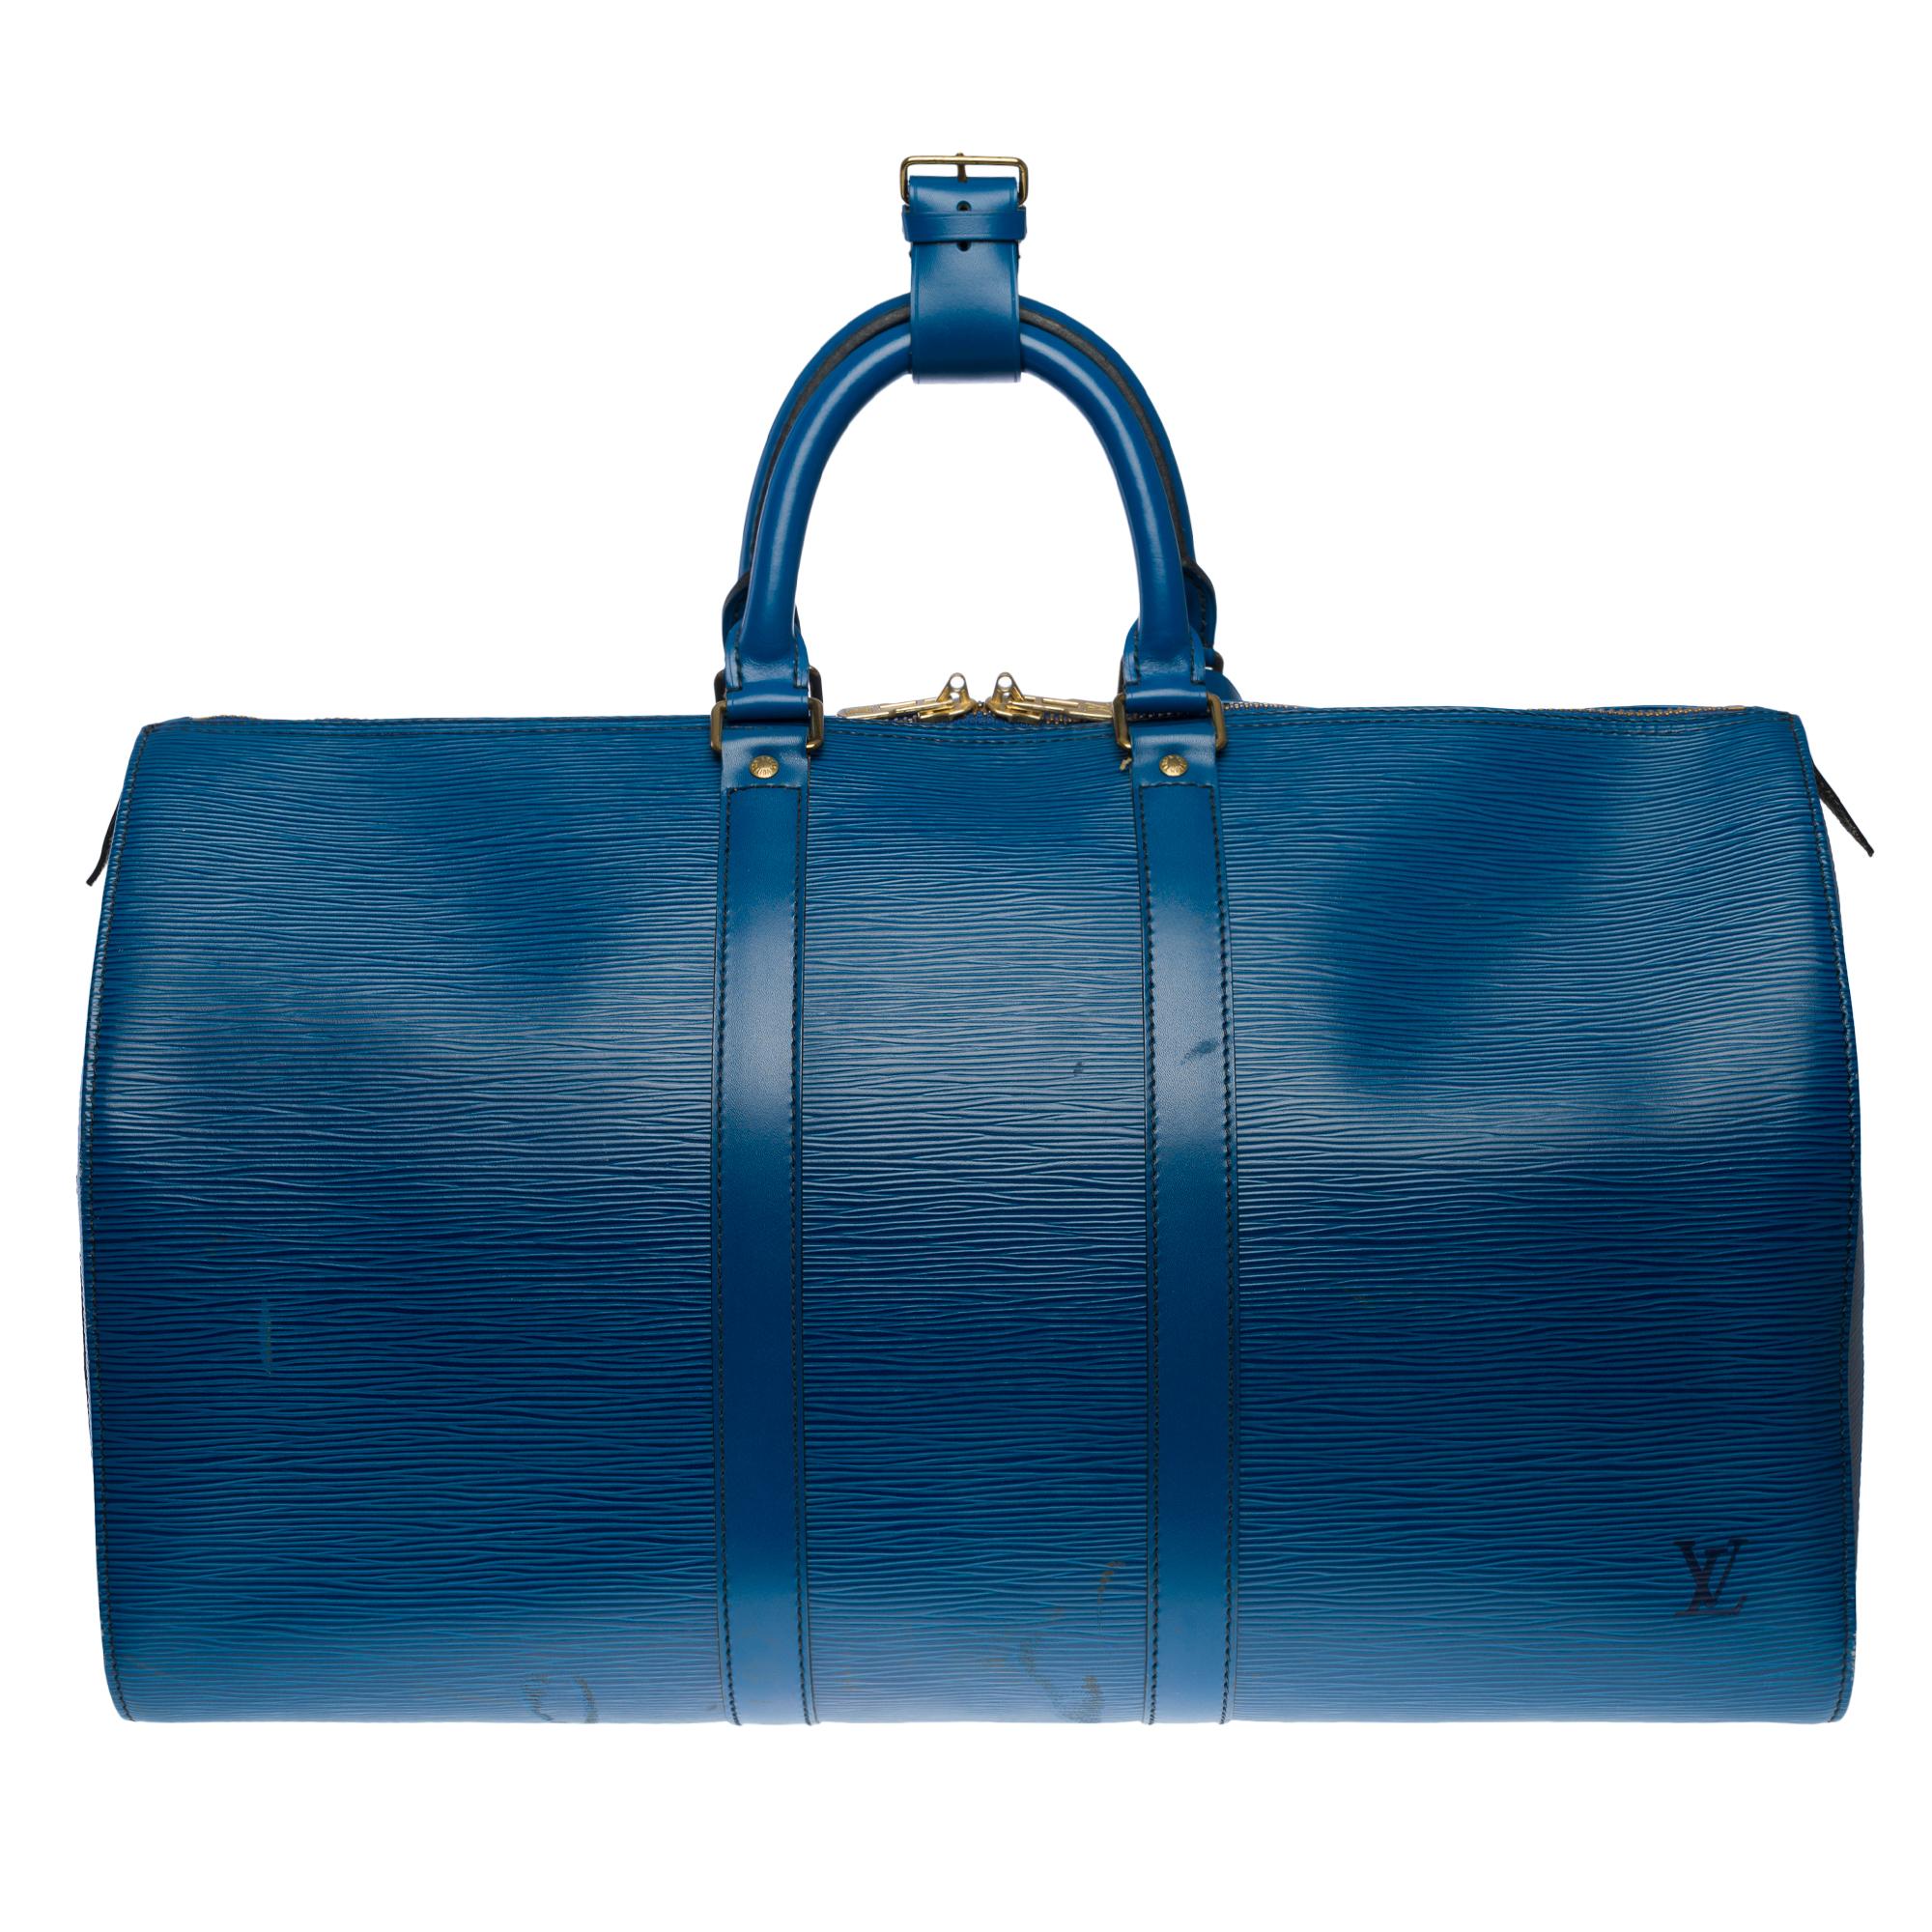 The very Chic Louis Vuitton Keepall 45 Travel Bag in Cobalt Blue Epi Leather, Double Slider Zipper, Double Blue Leather Handle
Zip
A side patch pocket
Inner lining in blue suede
Signature: 